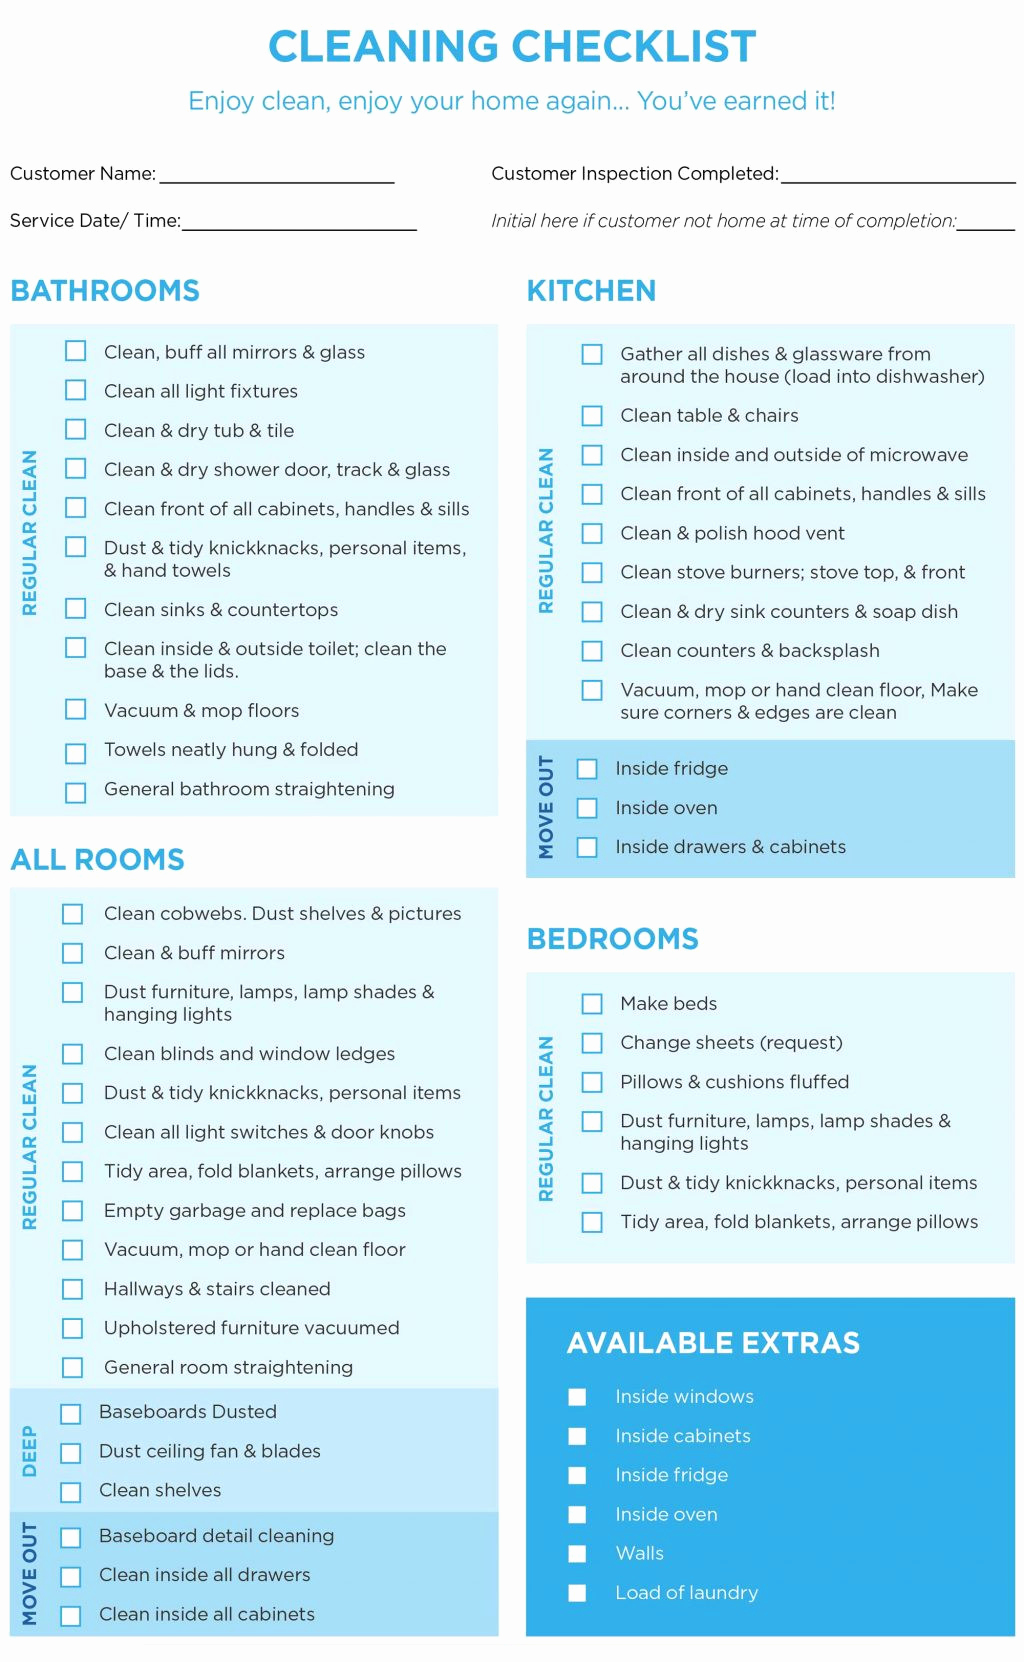 House Cleaning Checklist Template Fresh 40 Helpful House Cleaning Checklists for You